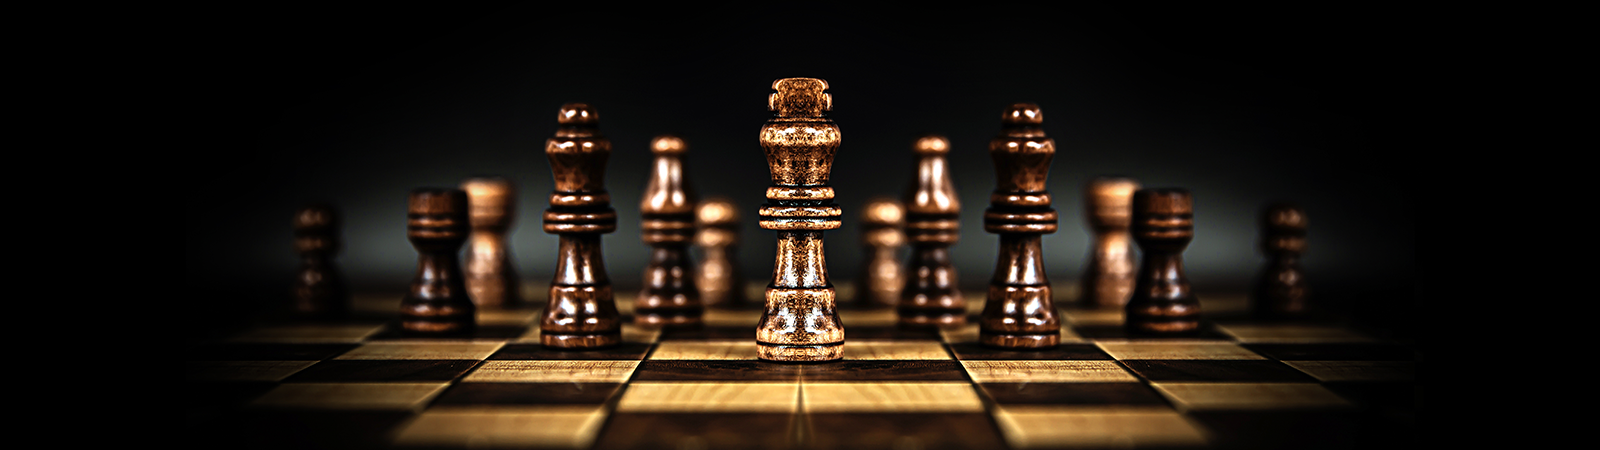 Image of chess board banner image